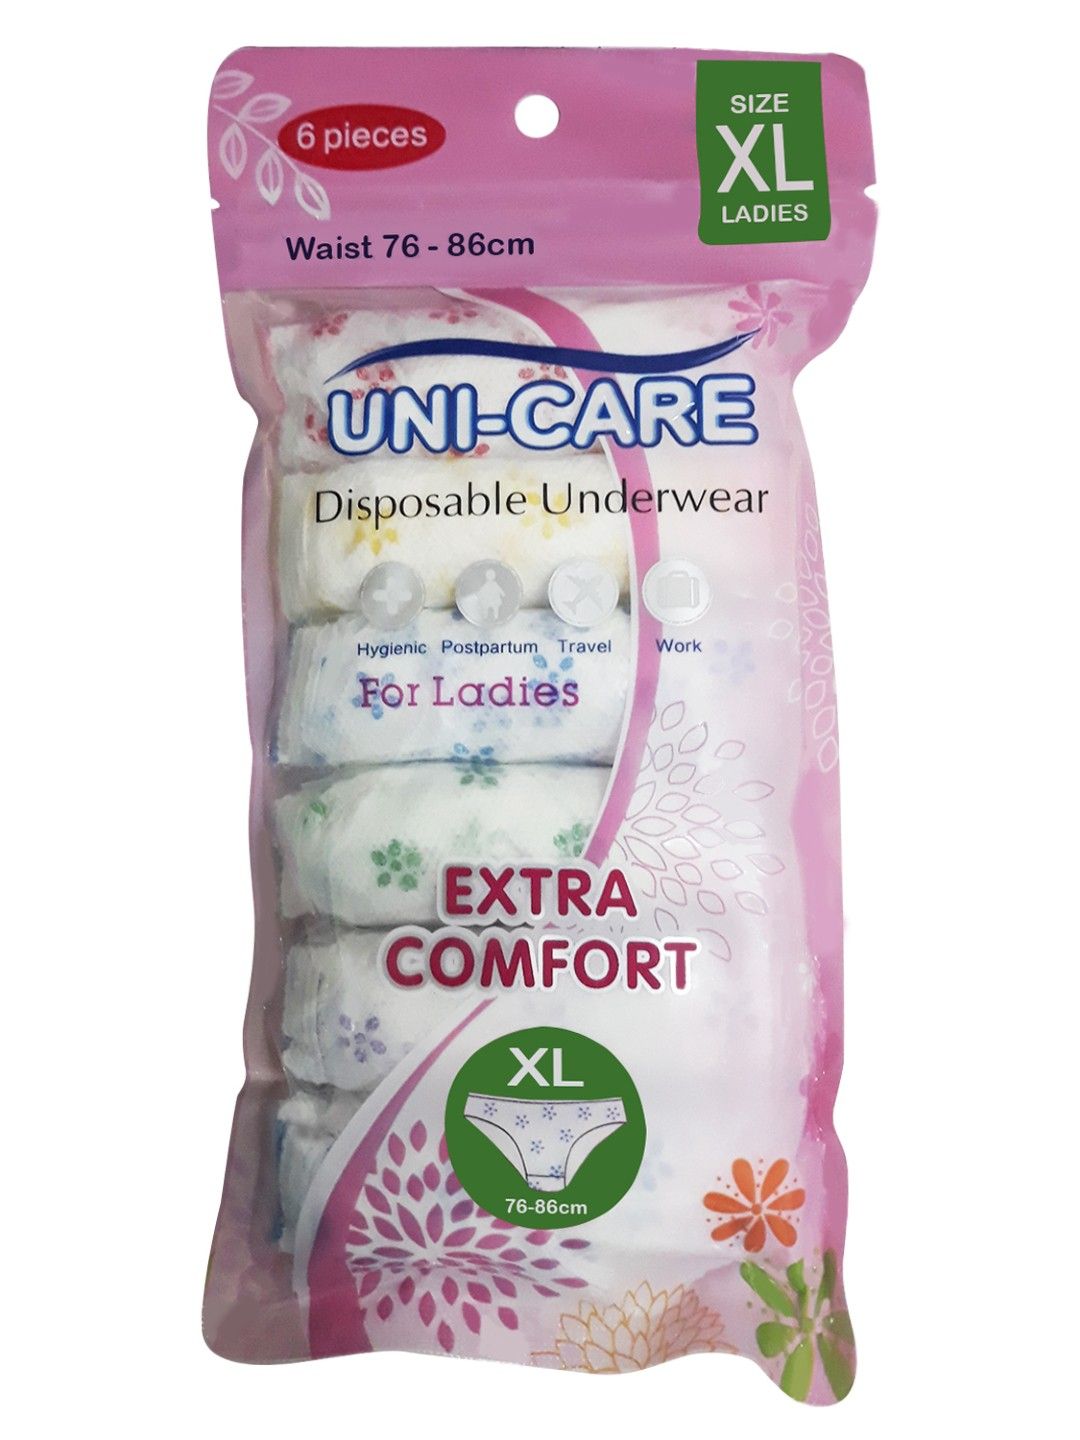 Uni-care Disposable Underwear for Women Extra Large 76-86cm (6s)